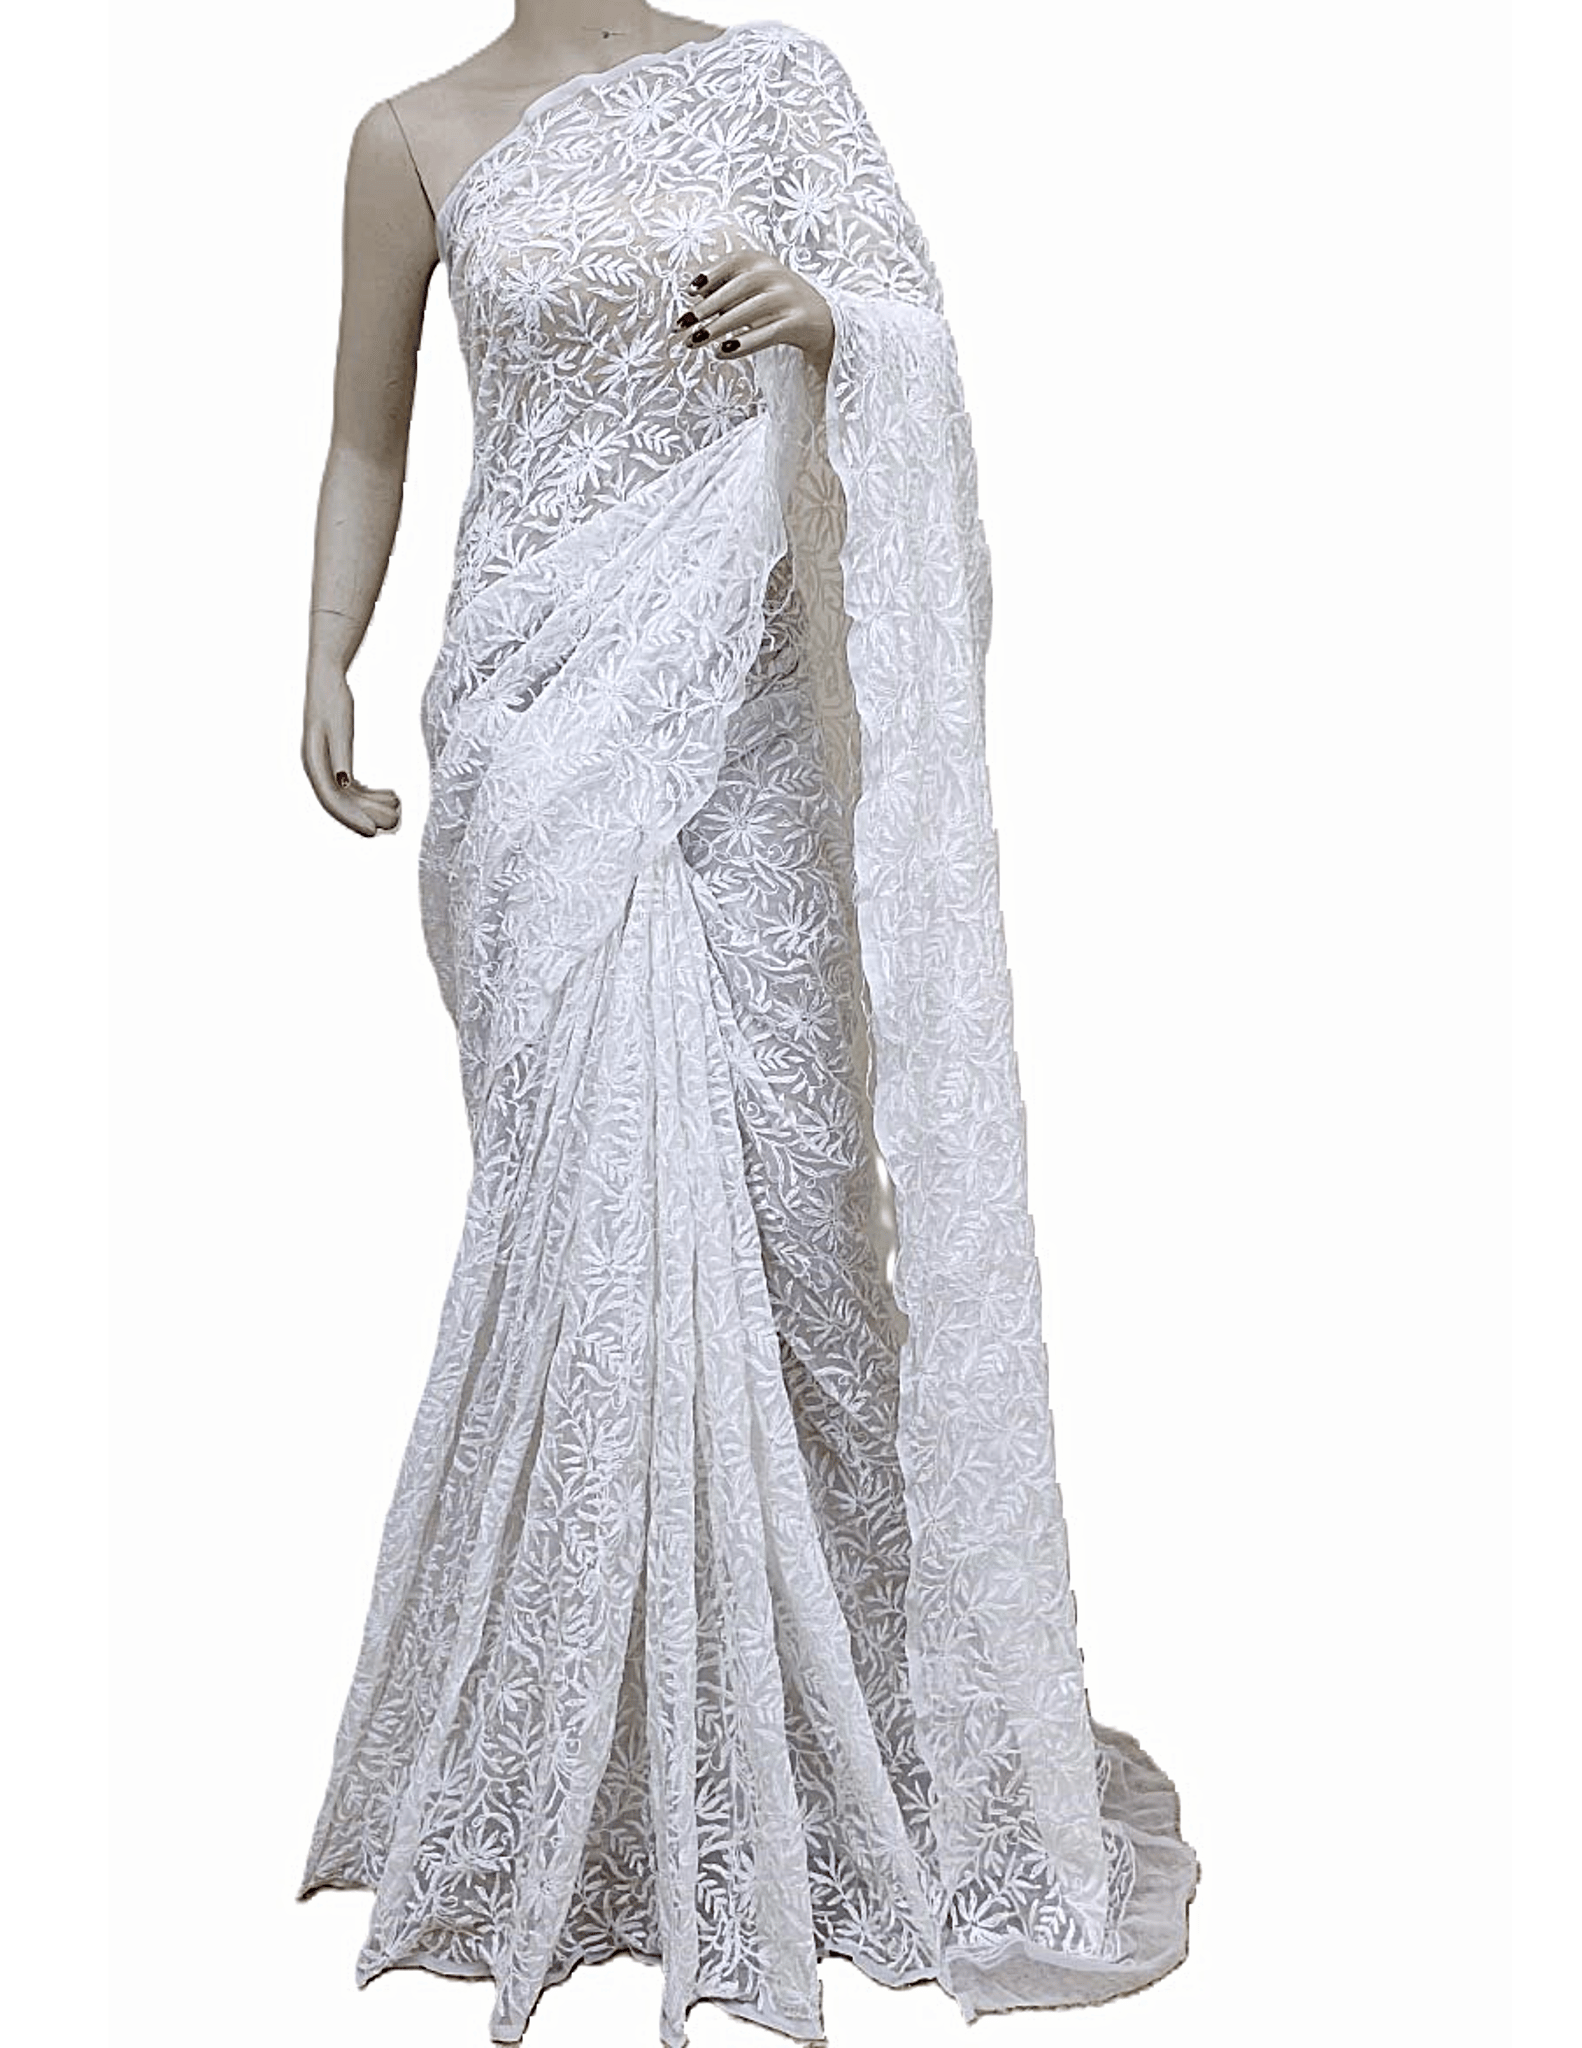 White Colour | Chikankari | Georgette | Saree With Blouse | Saree Comes with a Running Blouse Piece